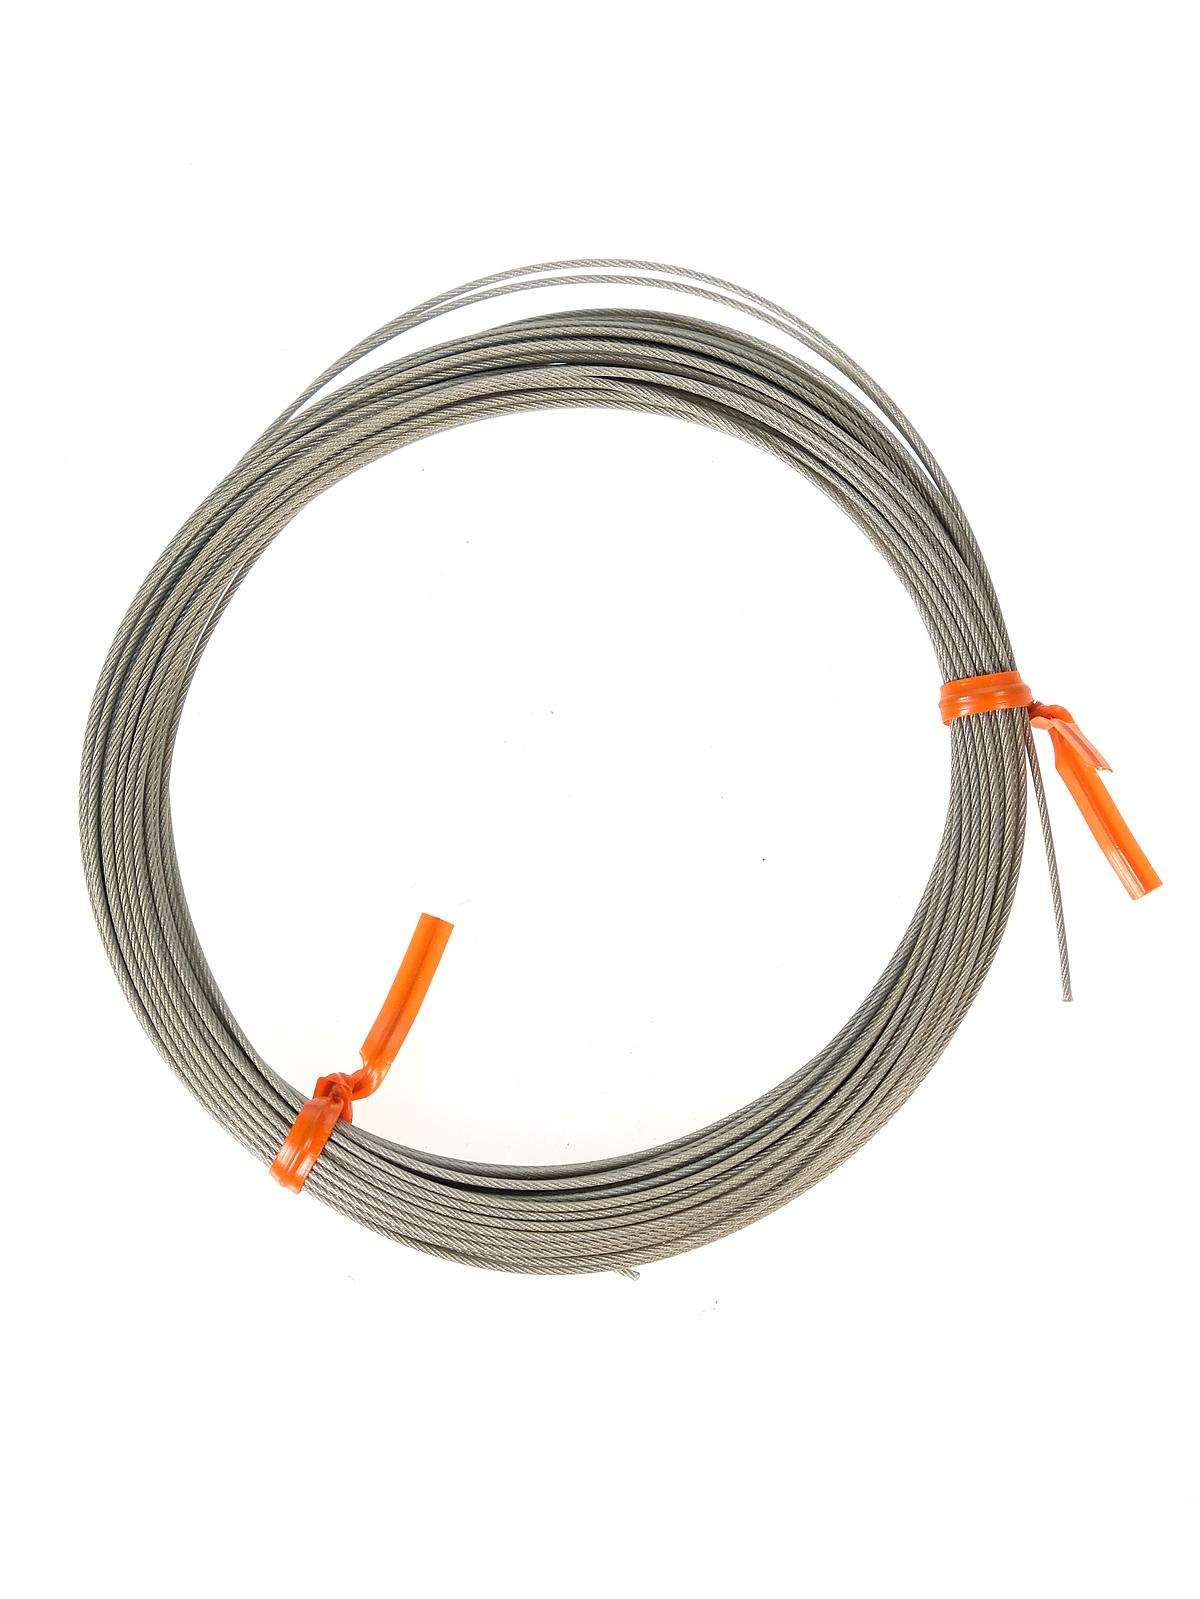 Replacement Cable For Straightedges For 72 In. - 96 In.